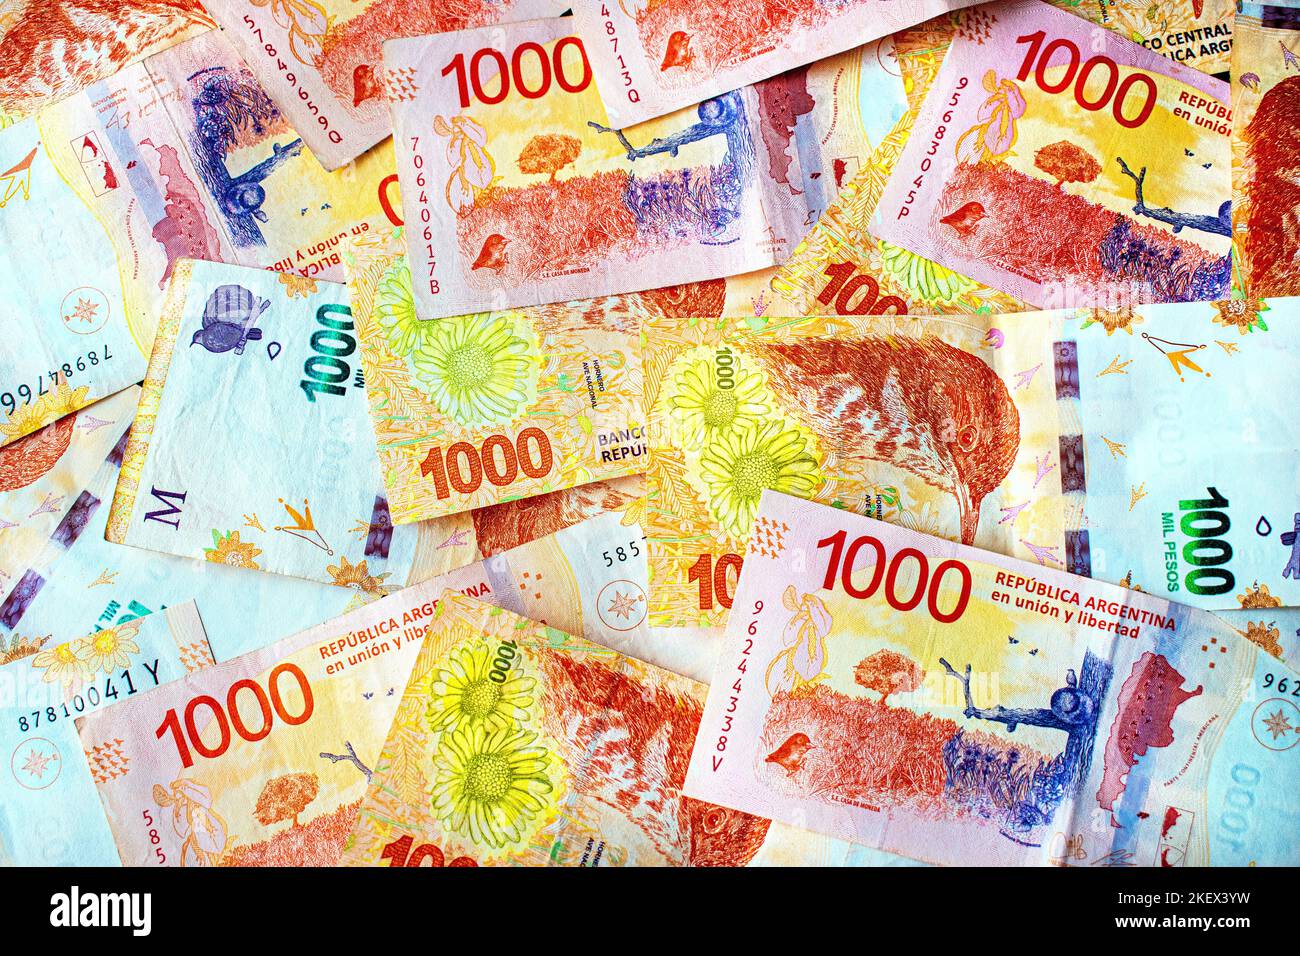 Argentine money. Banknotes of 1000 Argentine pesos in cash (economy, business, finance, inflation, crisis). Stock Photo